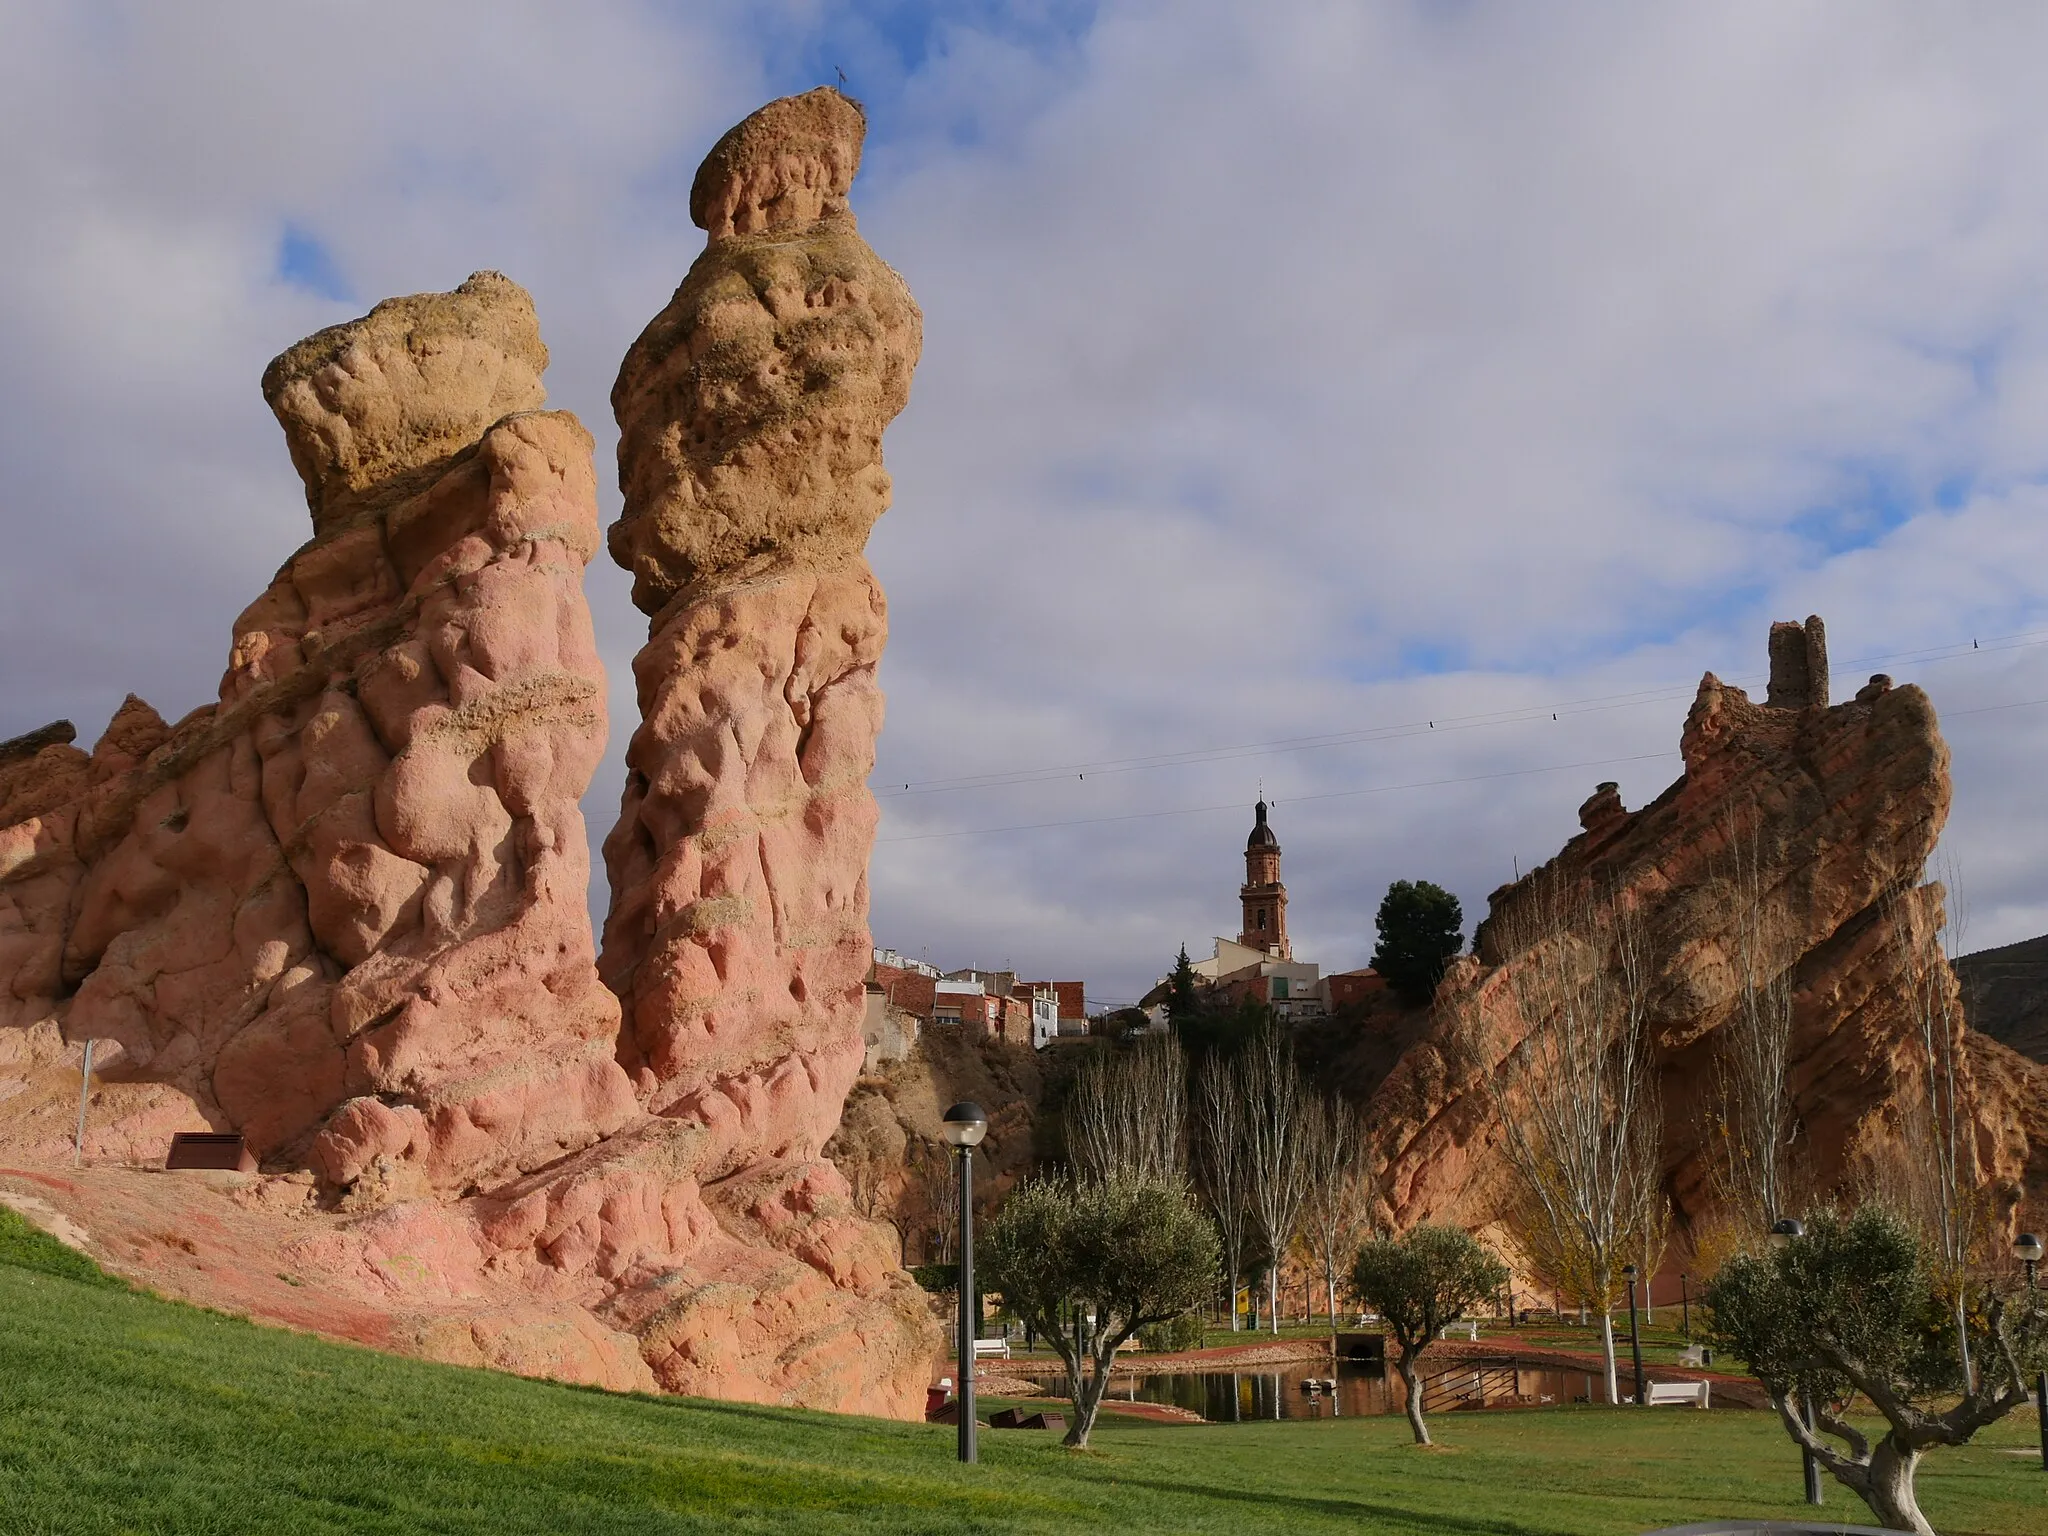 Photo showing: Autol, village in La Rioja, Spain. On the left, Picuezo and picueza rock formation; on the center, the village, with the Church of San Adrián y Santa Natalia; on the right, the ruins of the caste of Autol.